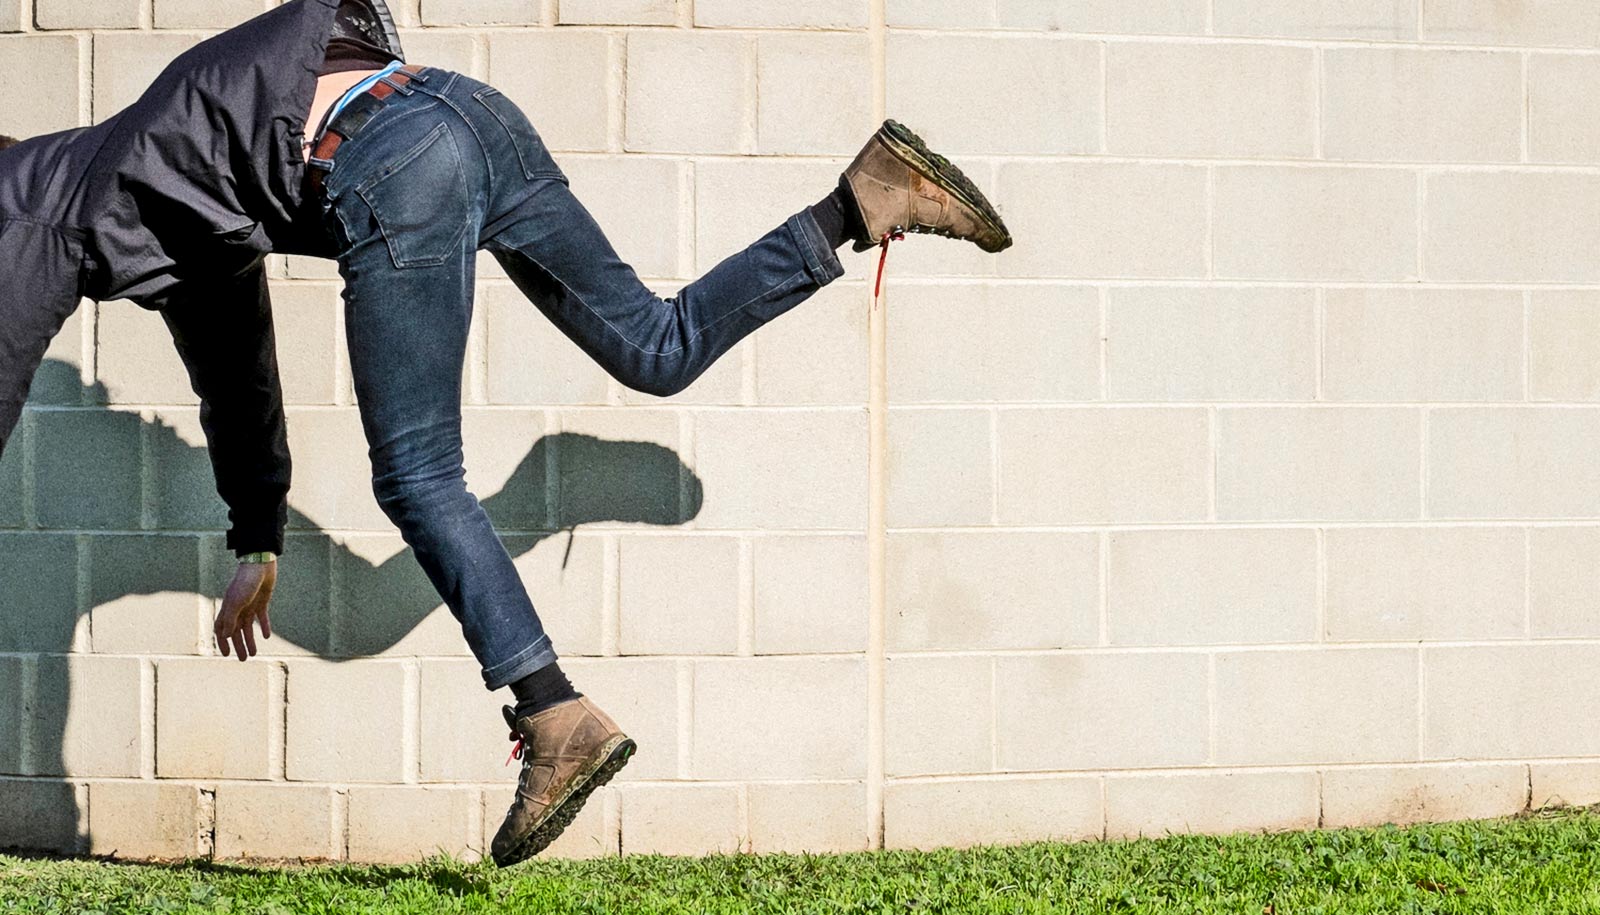 Young adults are falling down. Here's why - Futurity